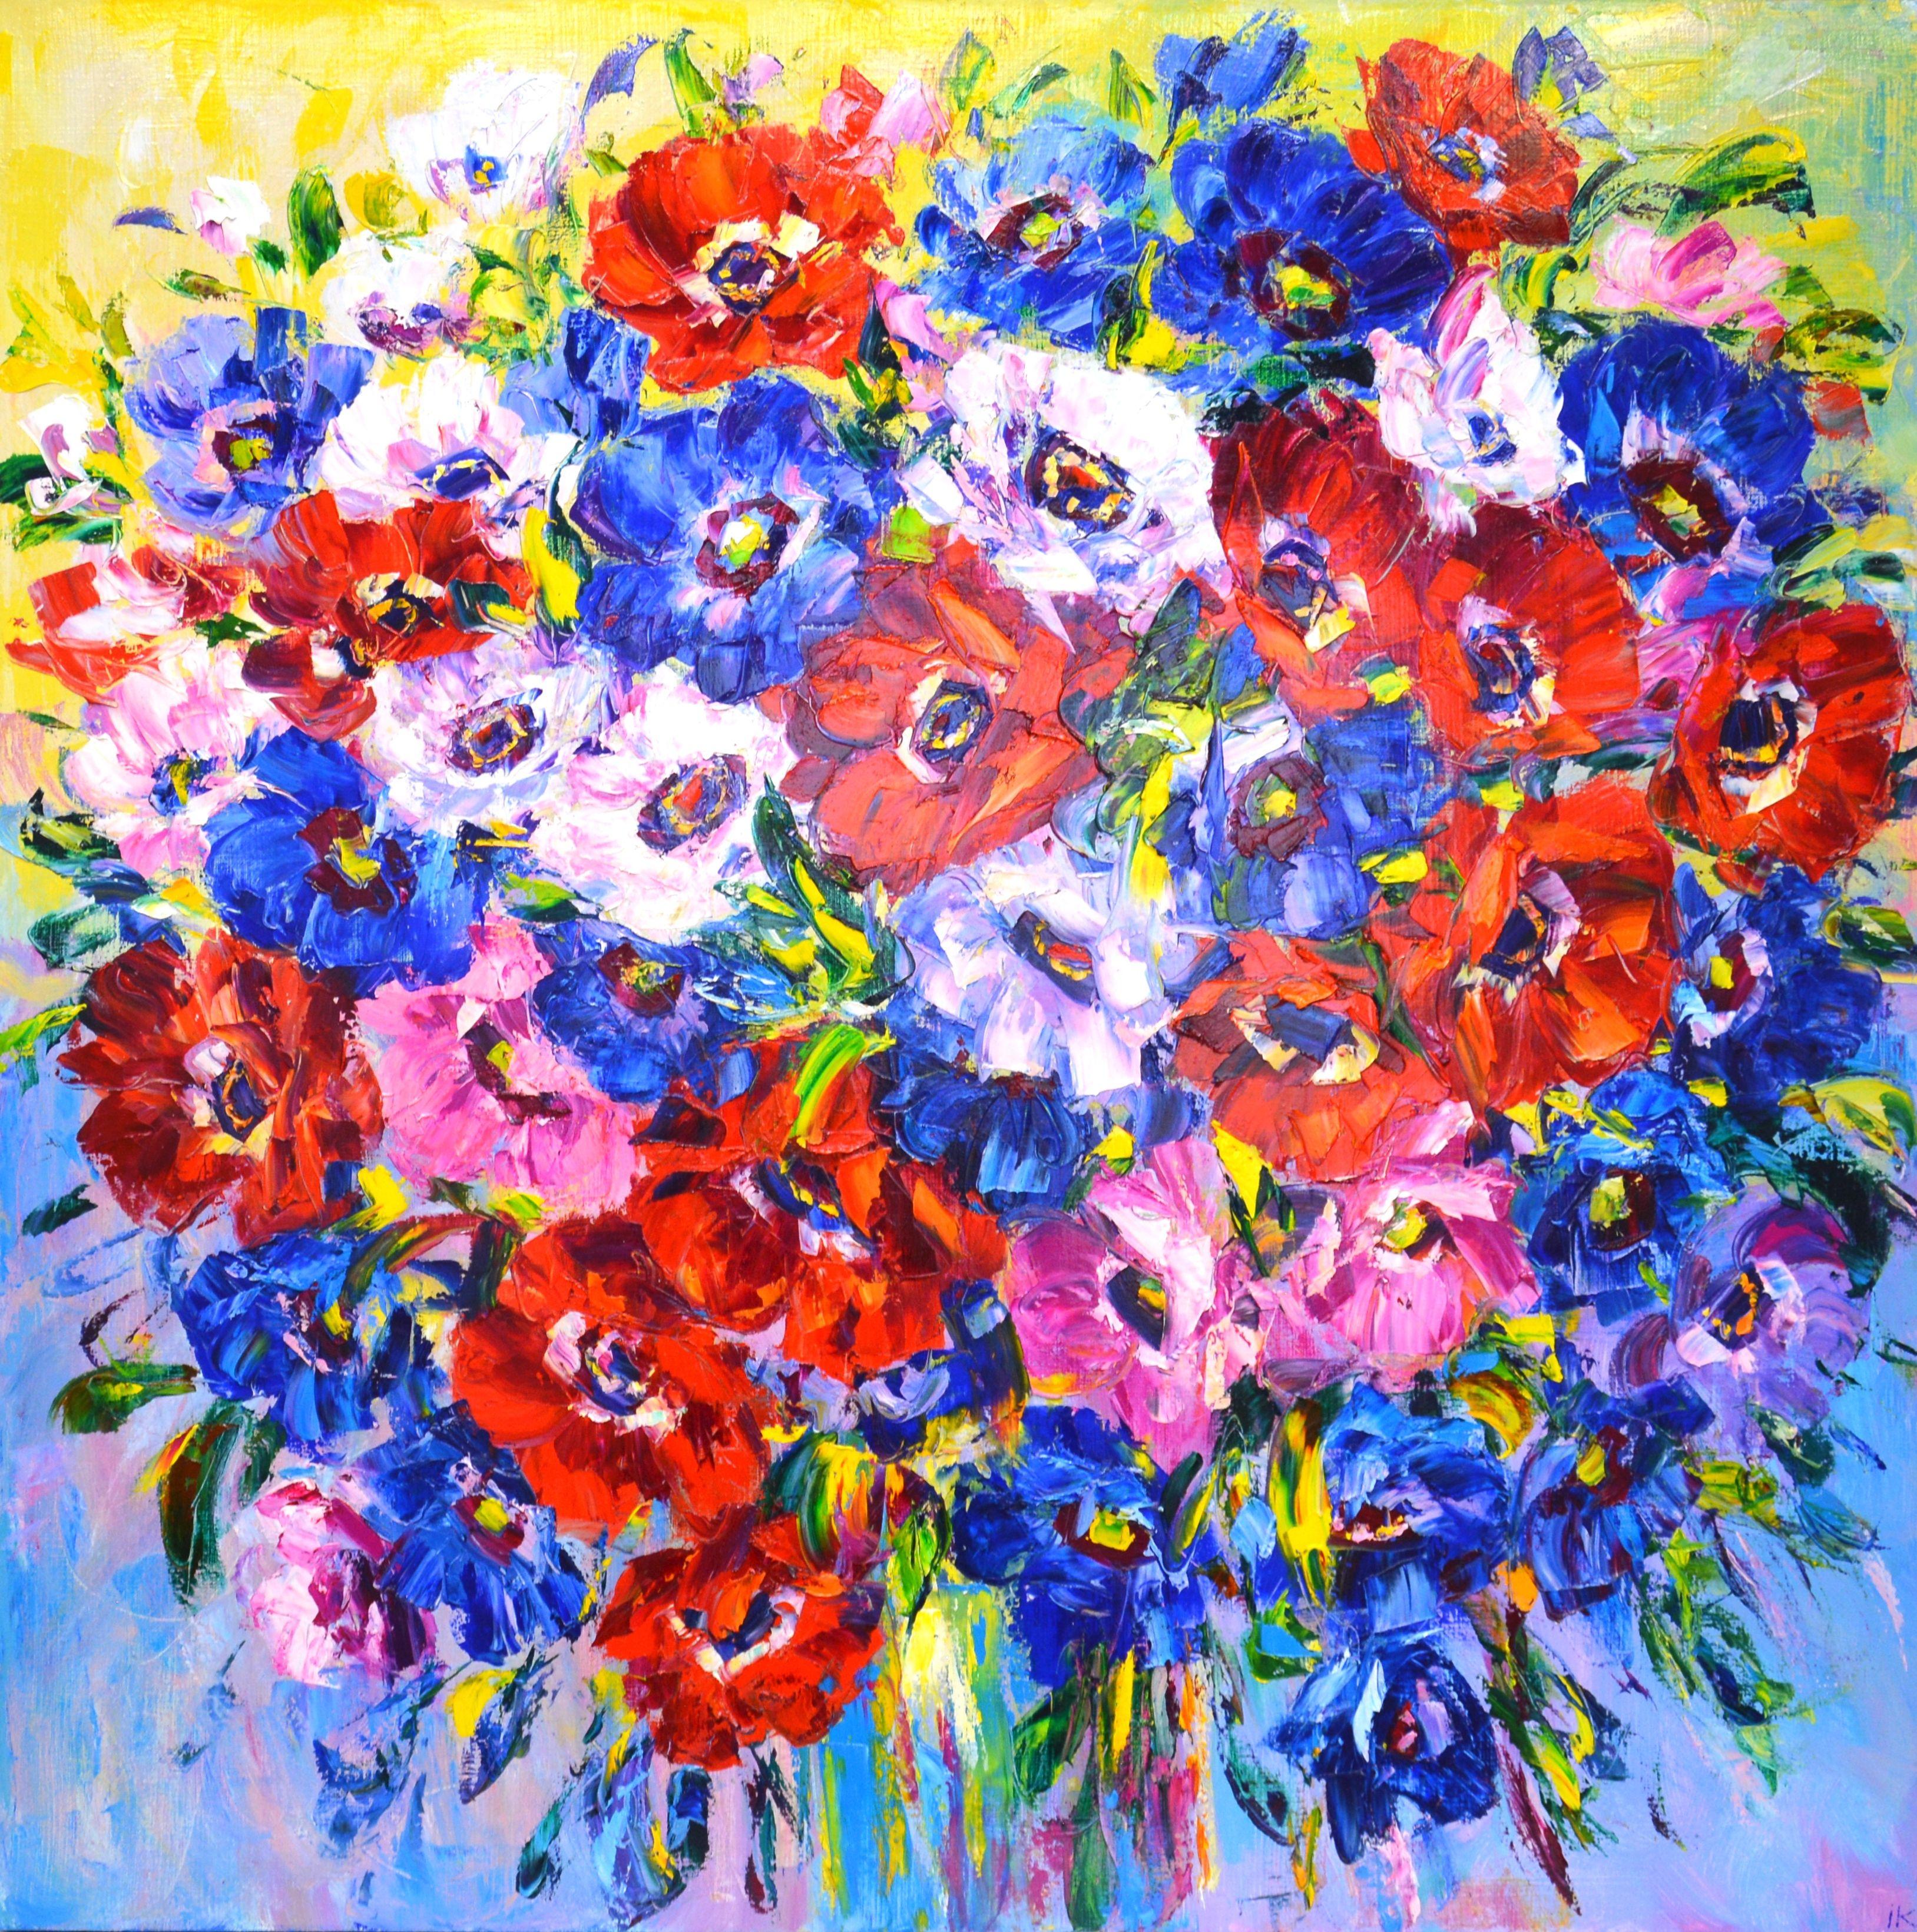 Anemones. Red, pink, blue and white flowers on an abstract background, created by brushes and a spatula. The picture is filled with positive, solar energy. Part of a permanent series of flower arrangements. Realism. Impressionism. Inspired by